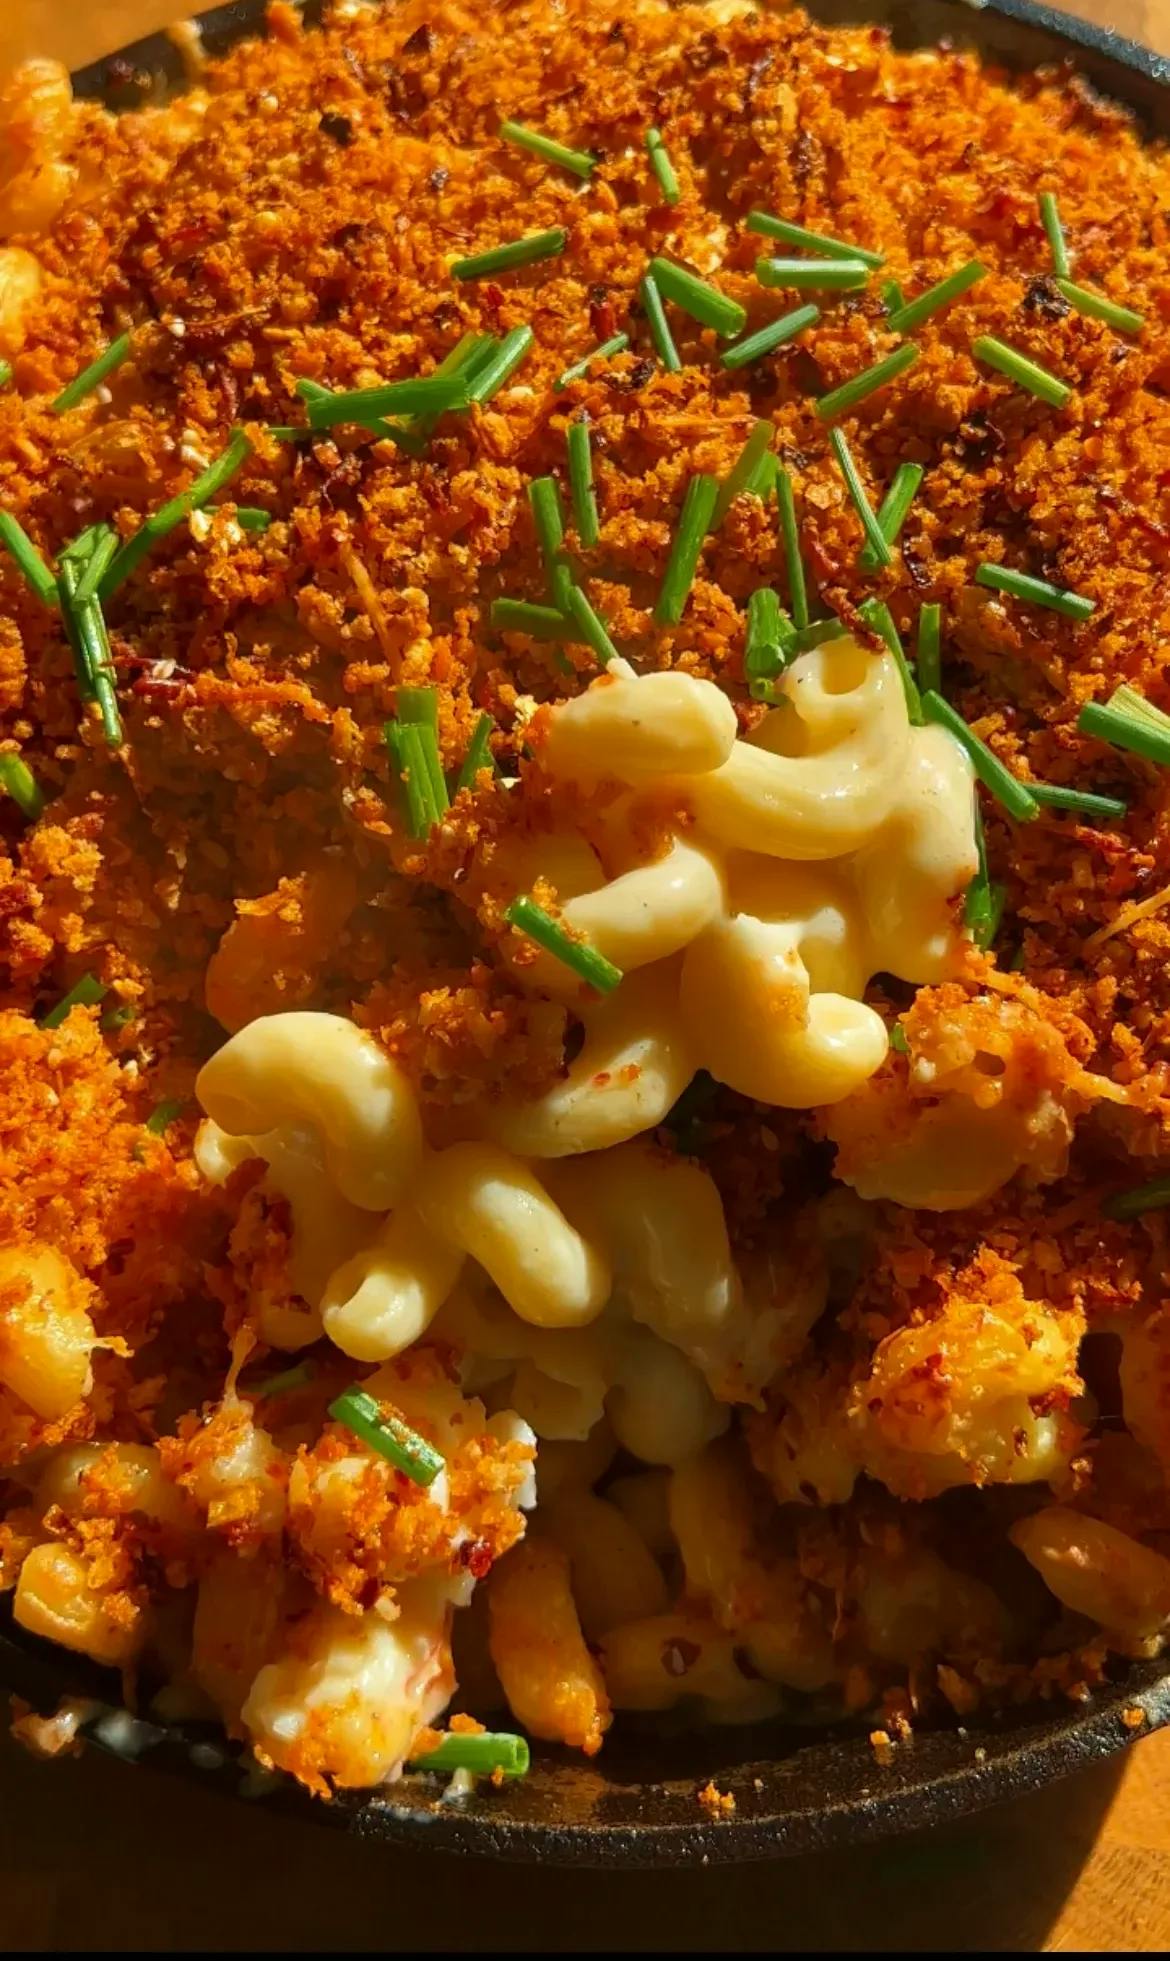 Picture for 4-Cheese Lobster Mac & Cheese with Fried Garlic & Chili Panko Topping